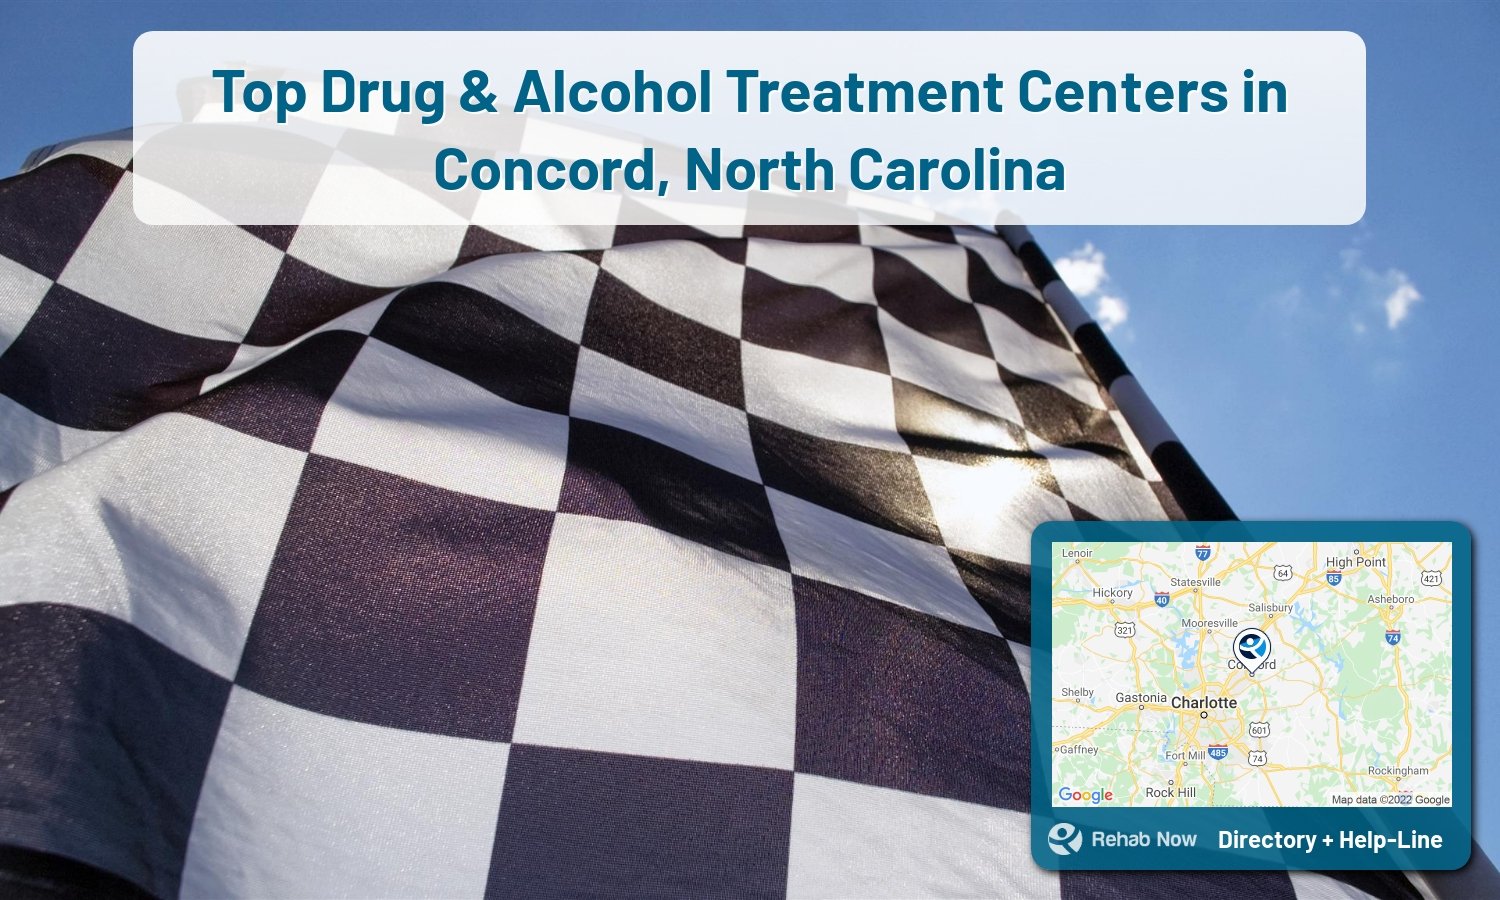 Ready to pick a rehab center in Concord? Get off alcohol, opiates, and other drugs, by selecting top drug rehab centers in North Carolina